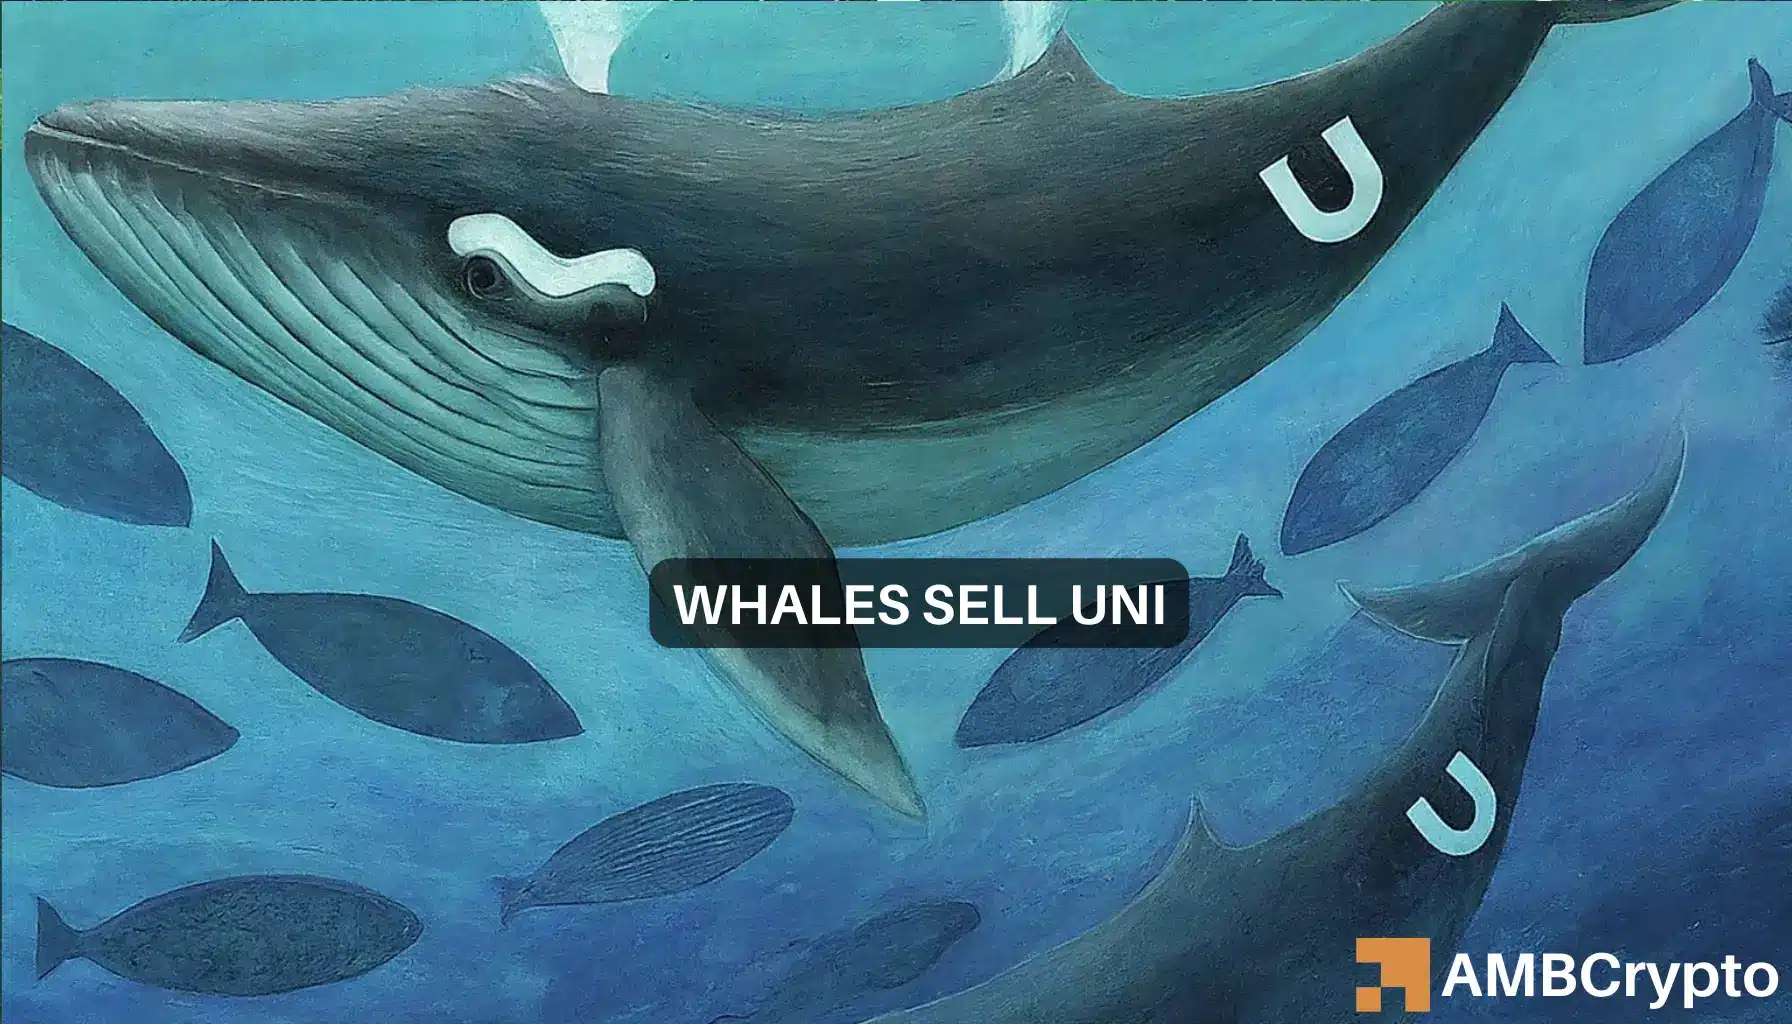 Uniswap – Whale sell-off sparks fear among UNI holders, but…